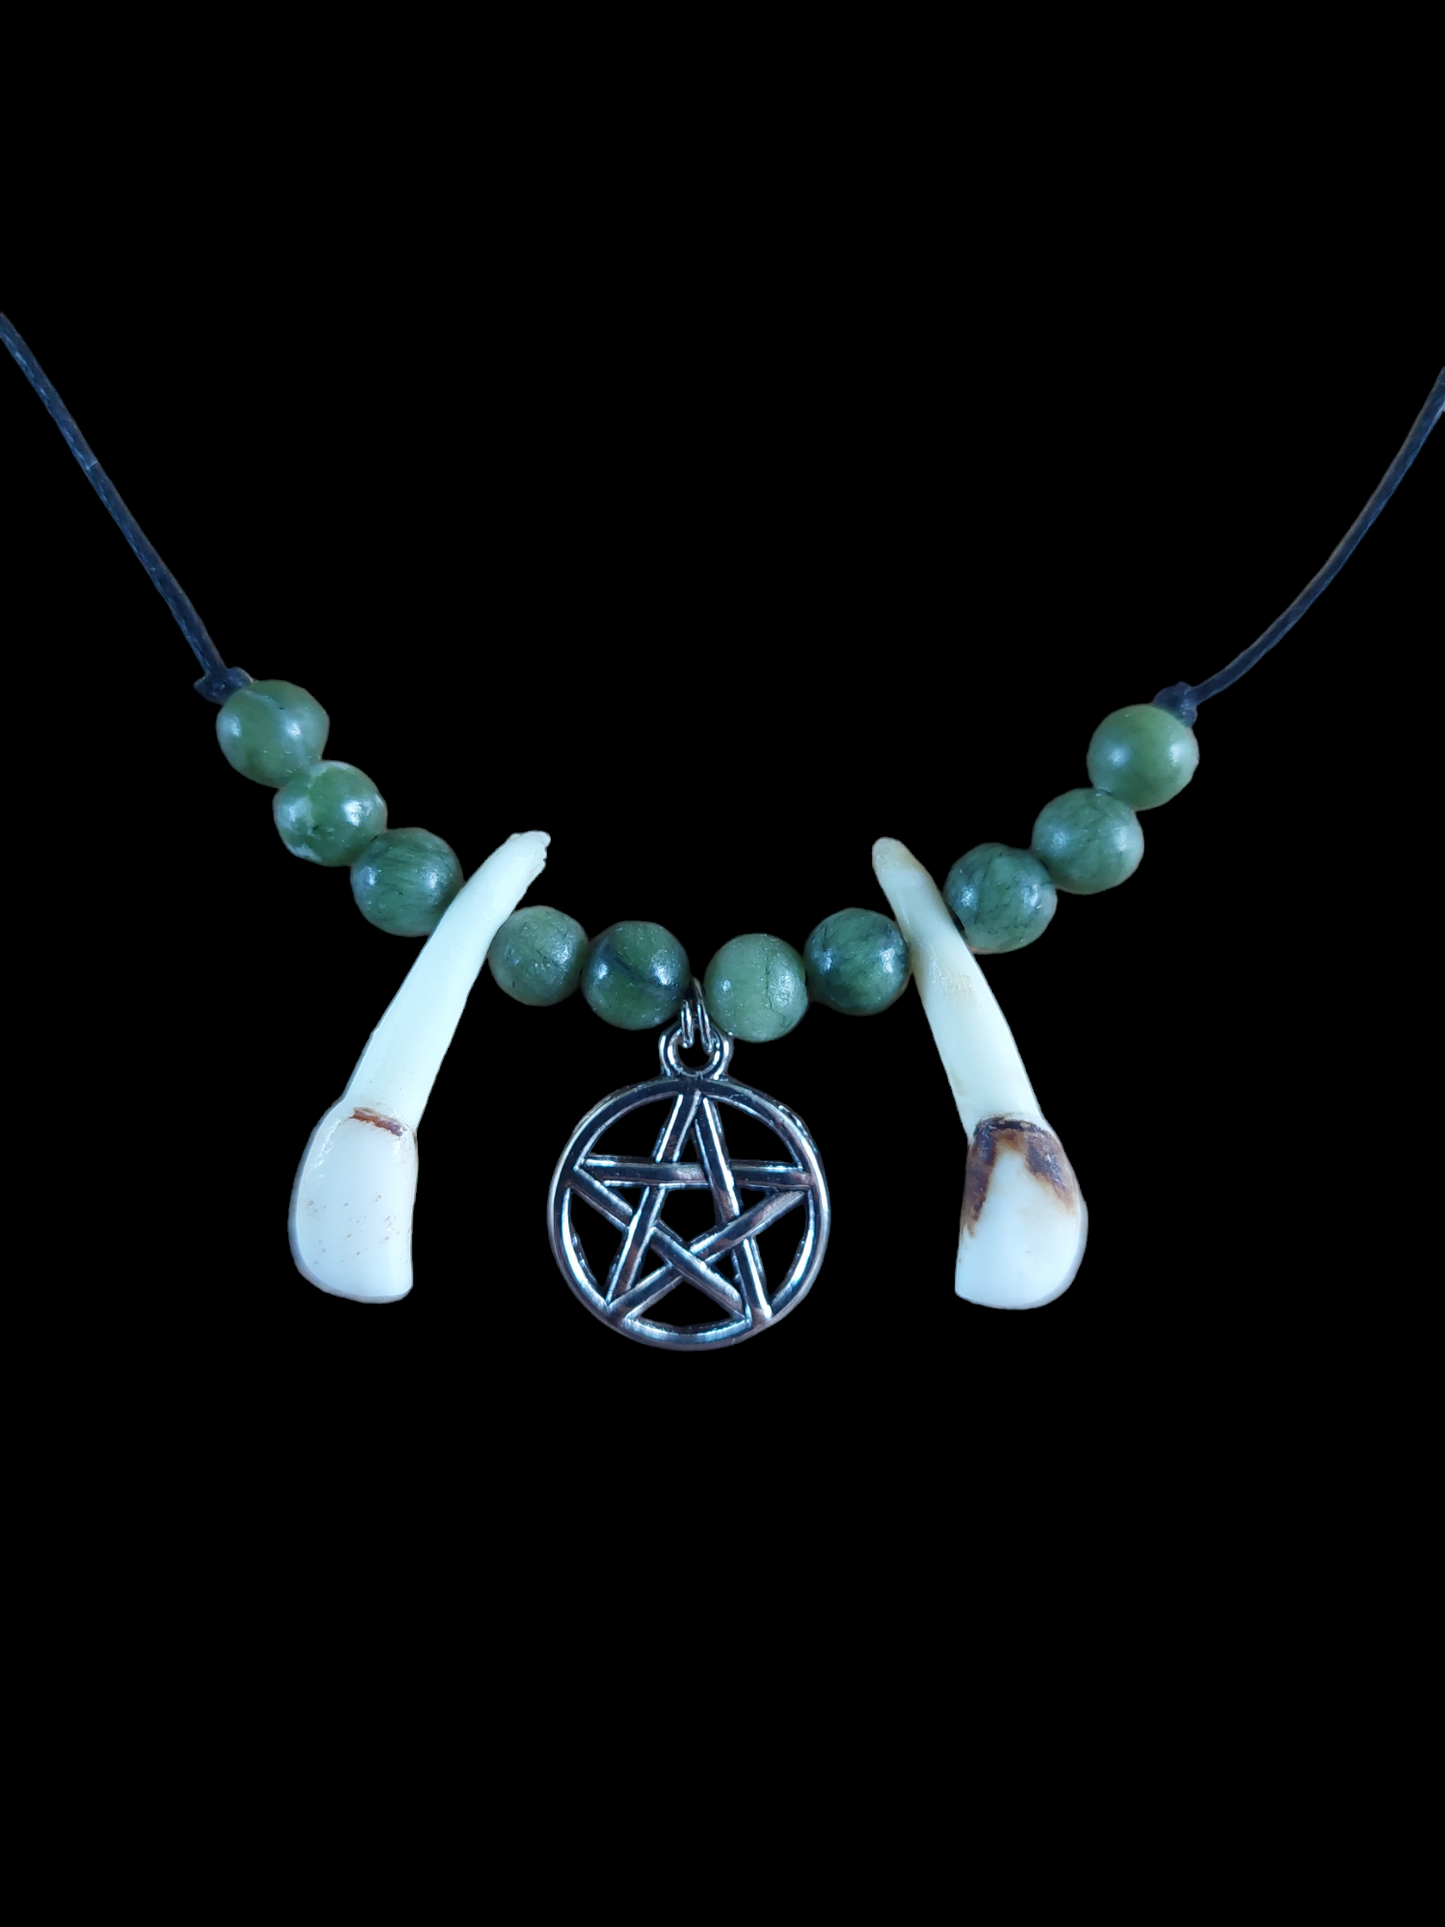 Red deer teeth, green jade and witch pendant amulet necklace